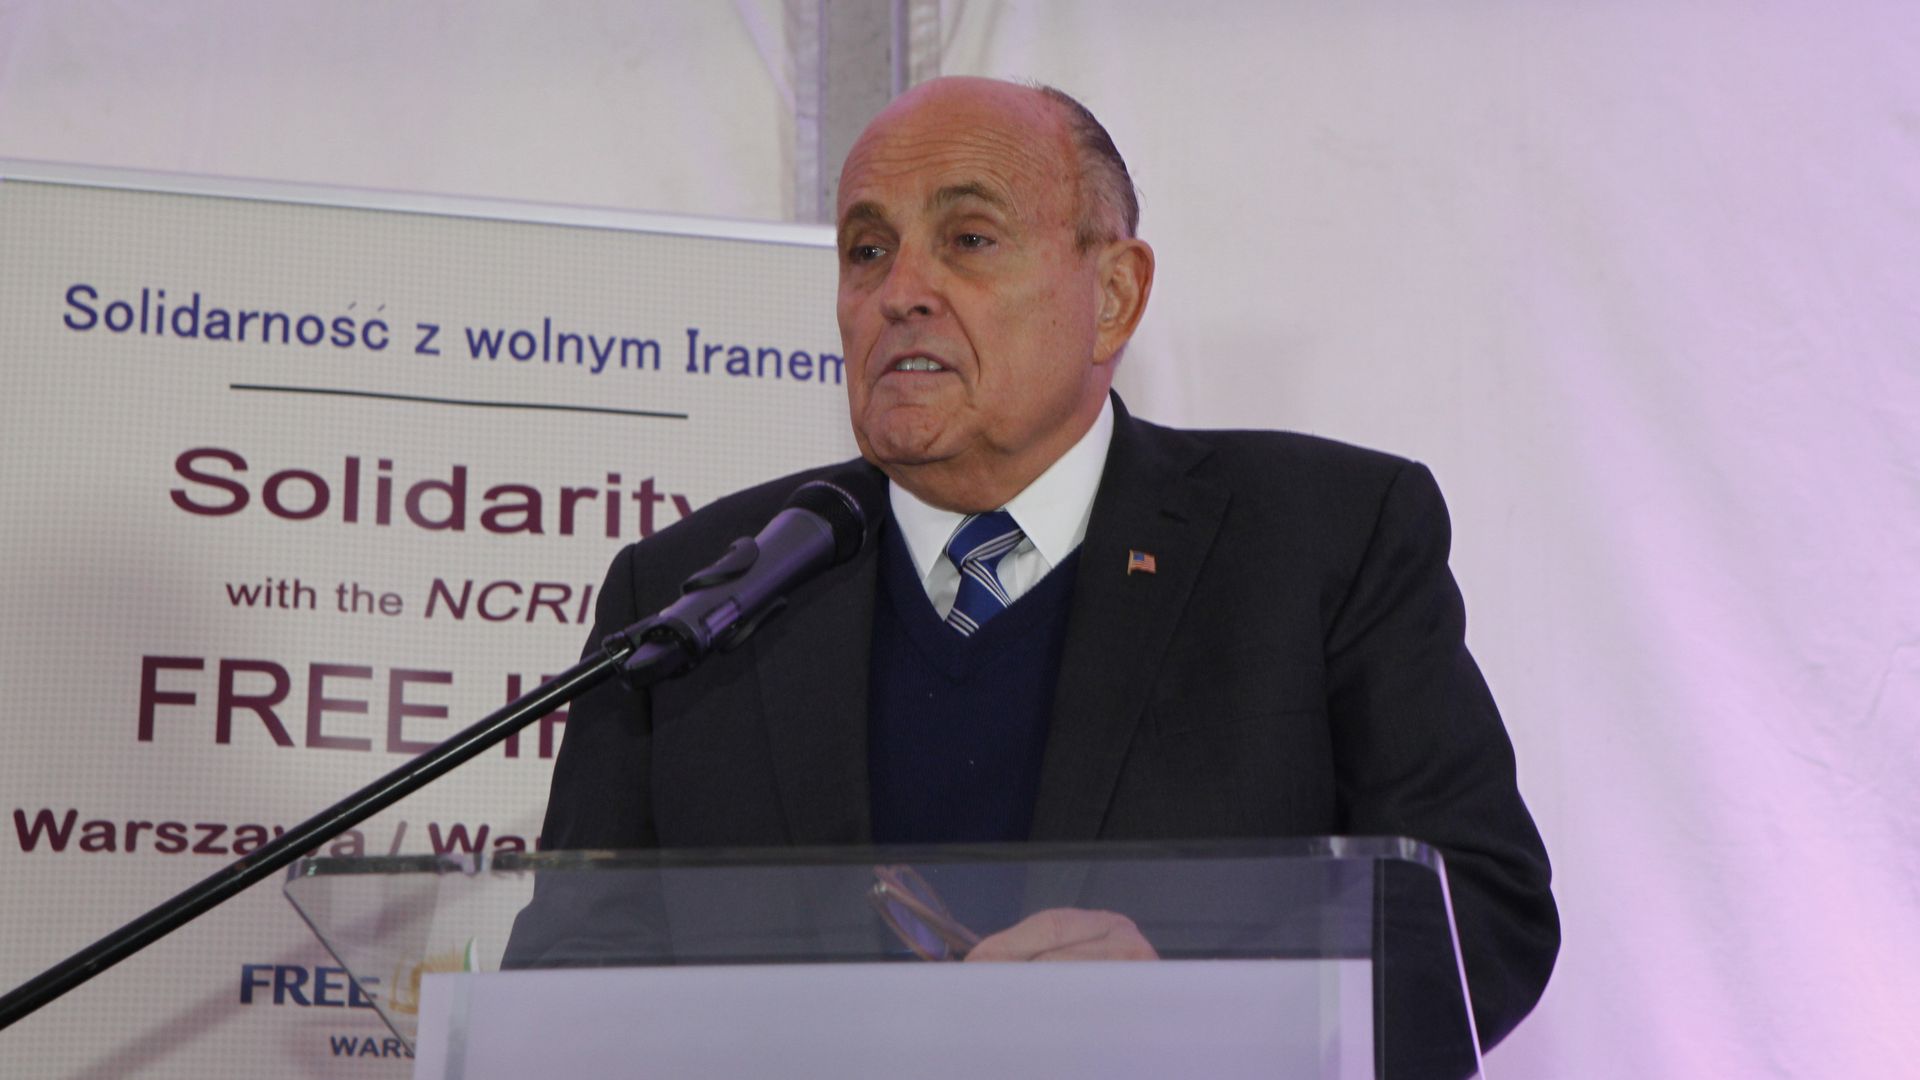  A press briefing held by Rudy Giuliani in Warsaw